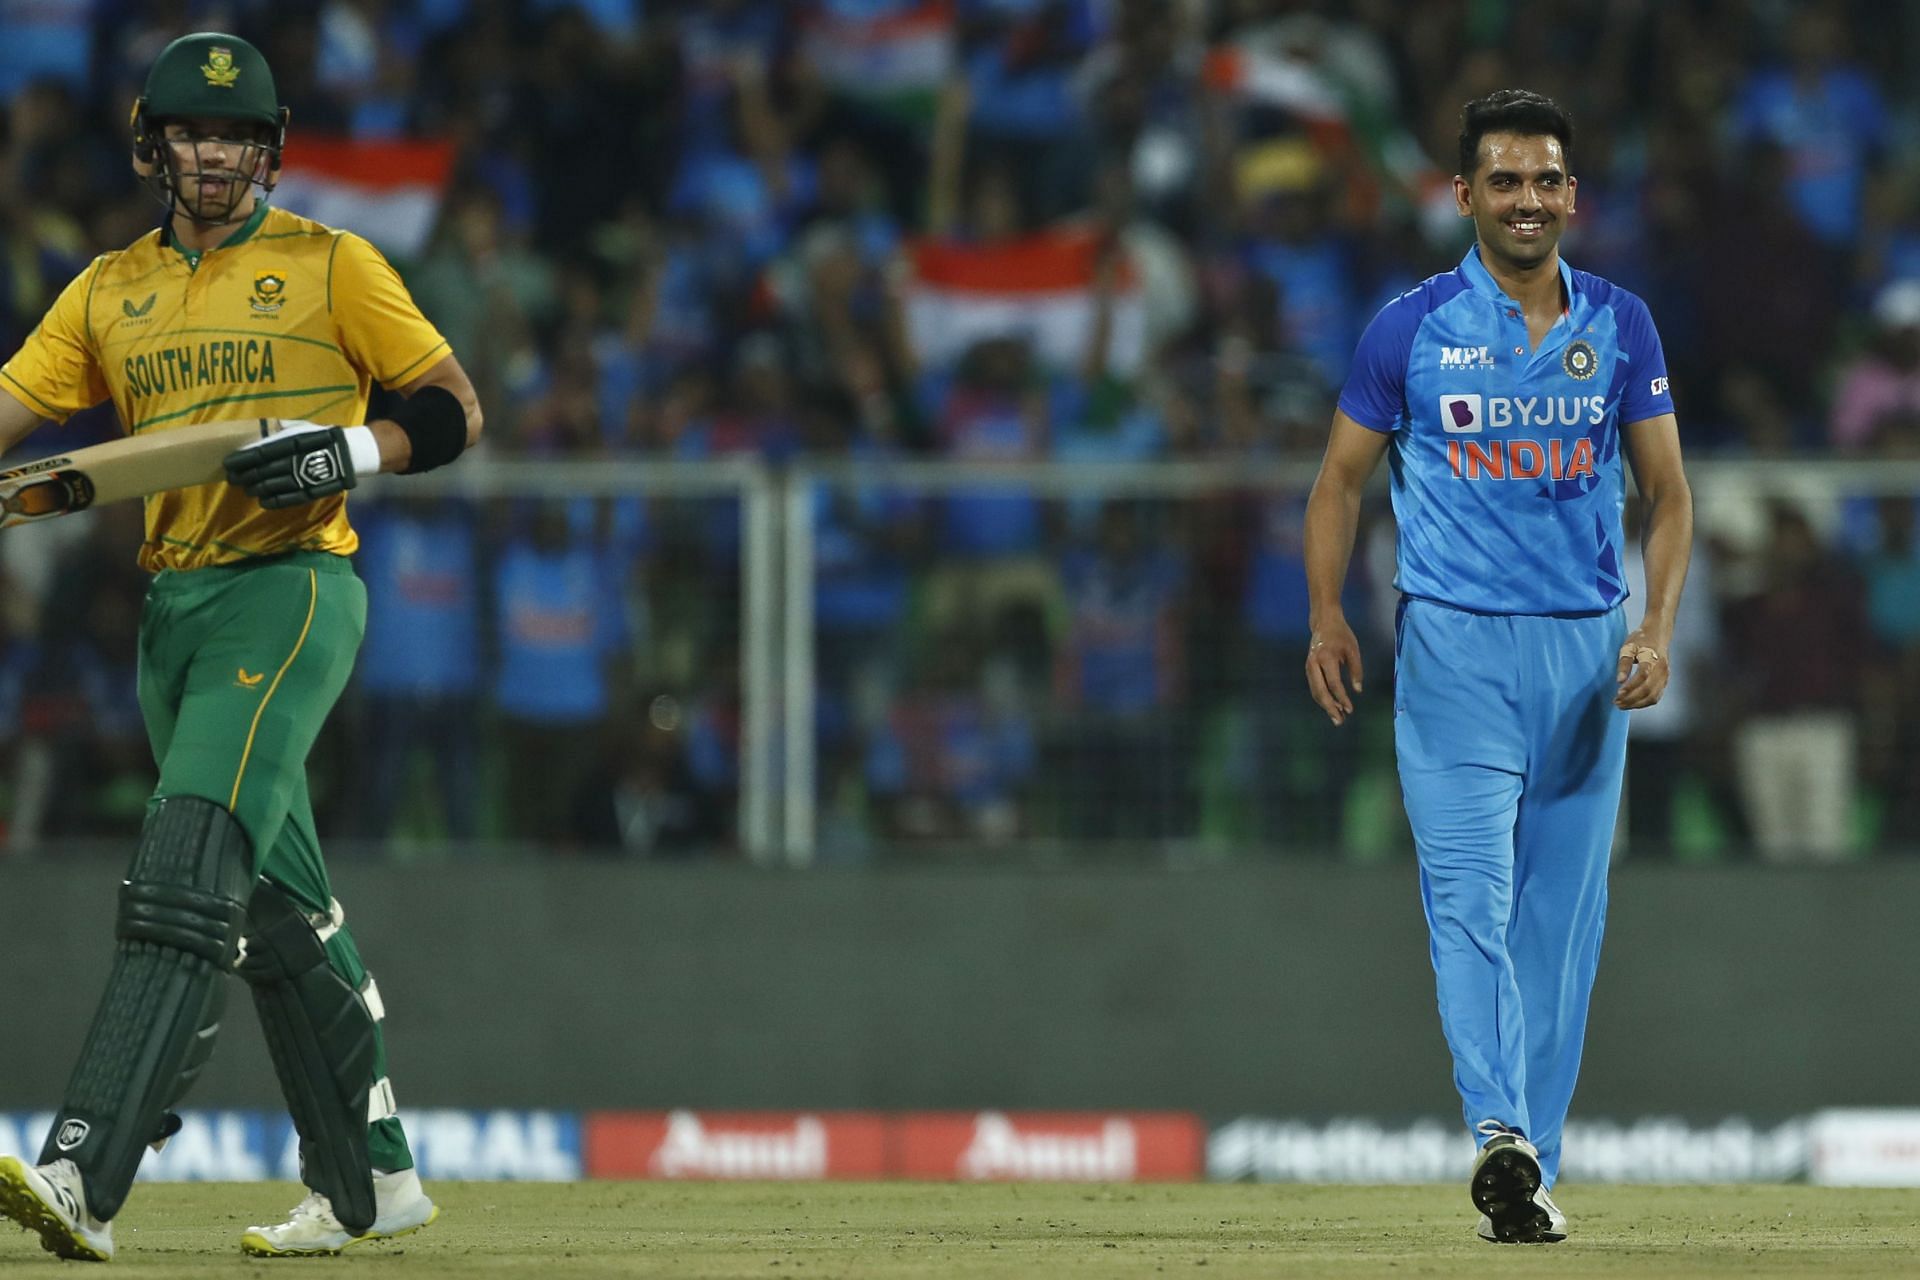 Will India consider Deepak Chahar as a replacement for Bumrah given his batting prowess? Pic: Getty Images